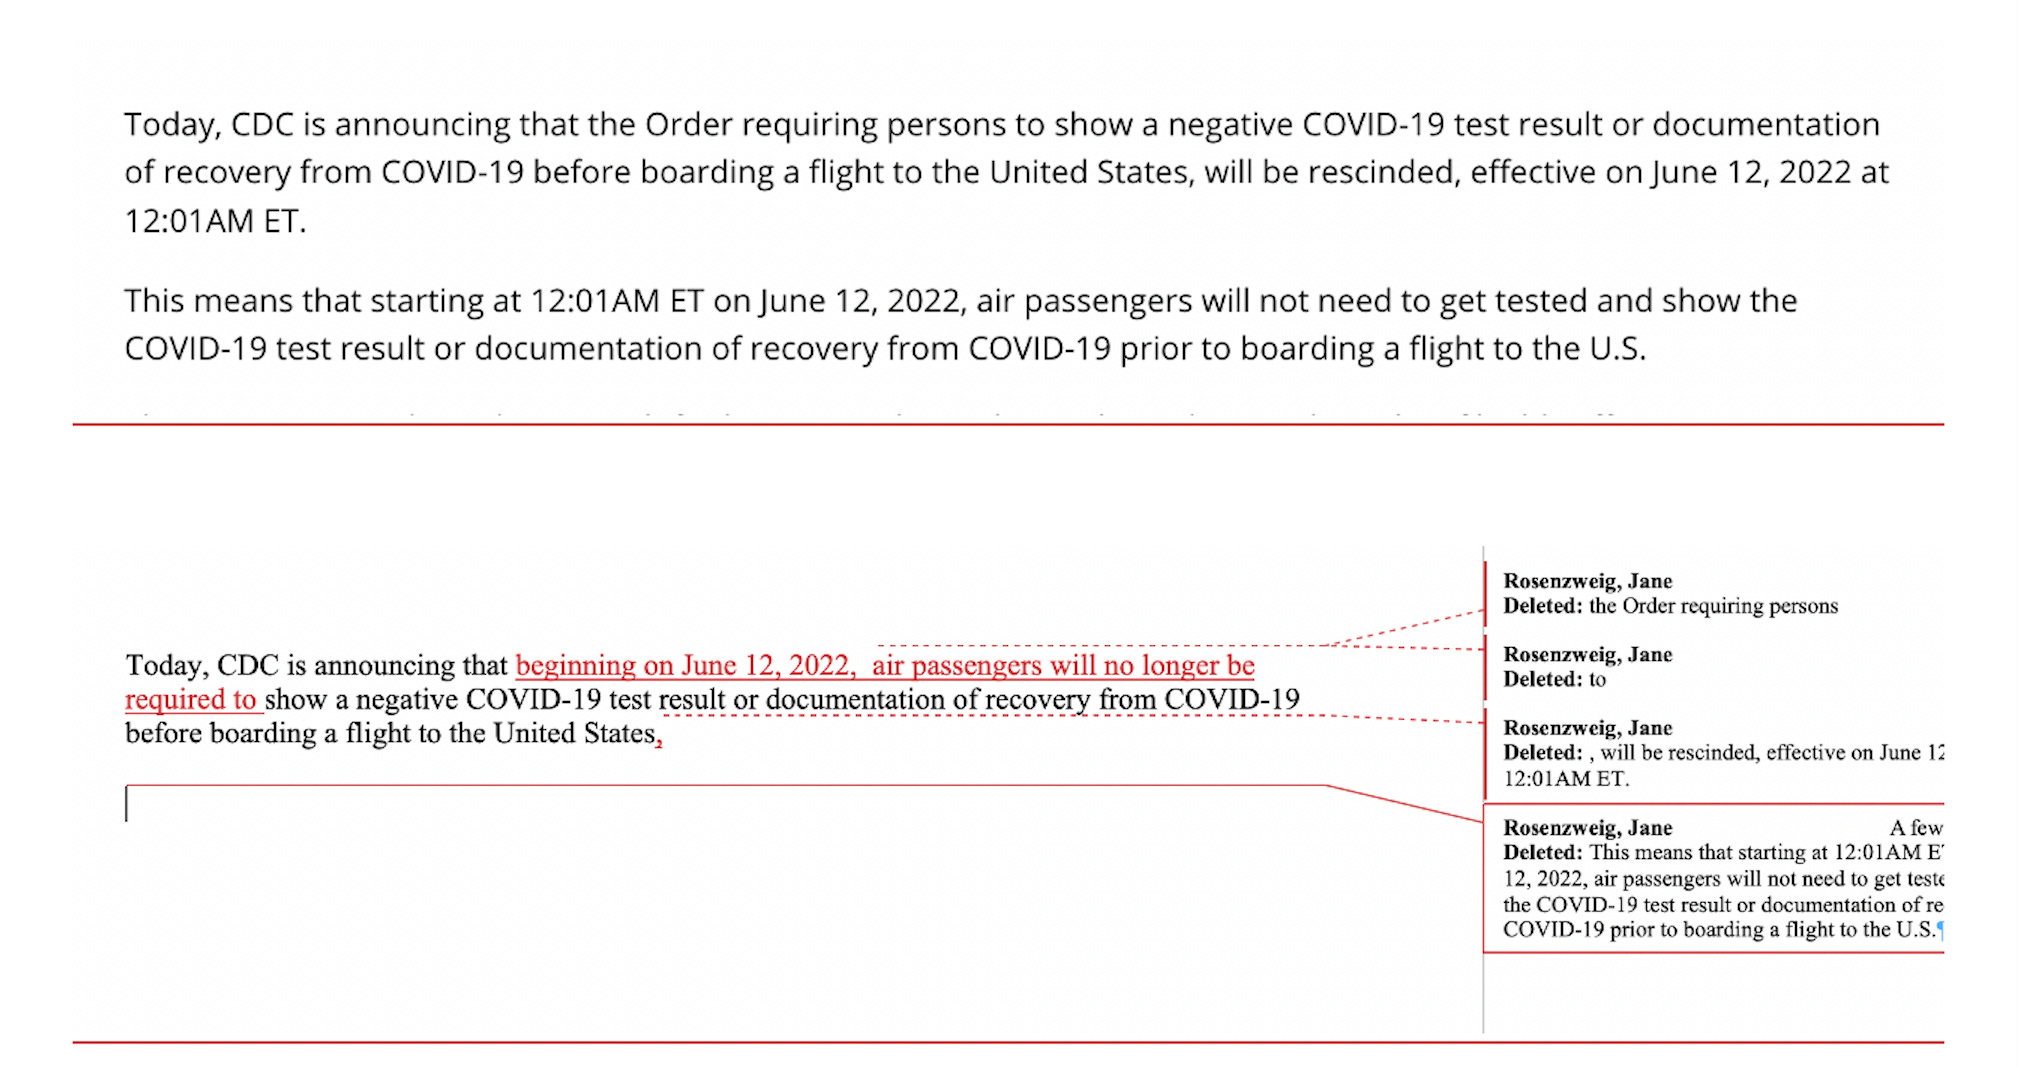 Edited version: Today, CDC is announcing that beginning on June 12, 2022, air passengers will no longer be required to show a negative COVID-19 test result or documentation of recordy from COVID-19 before boarding a flight to the United States.